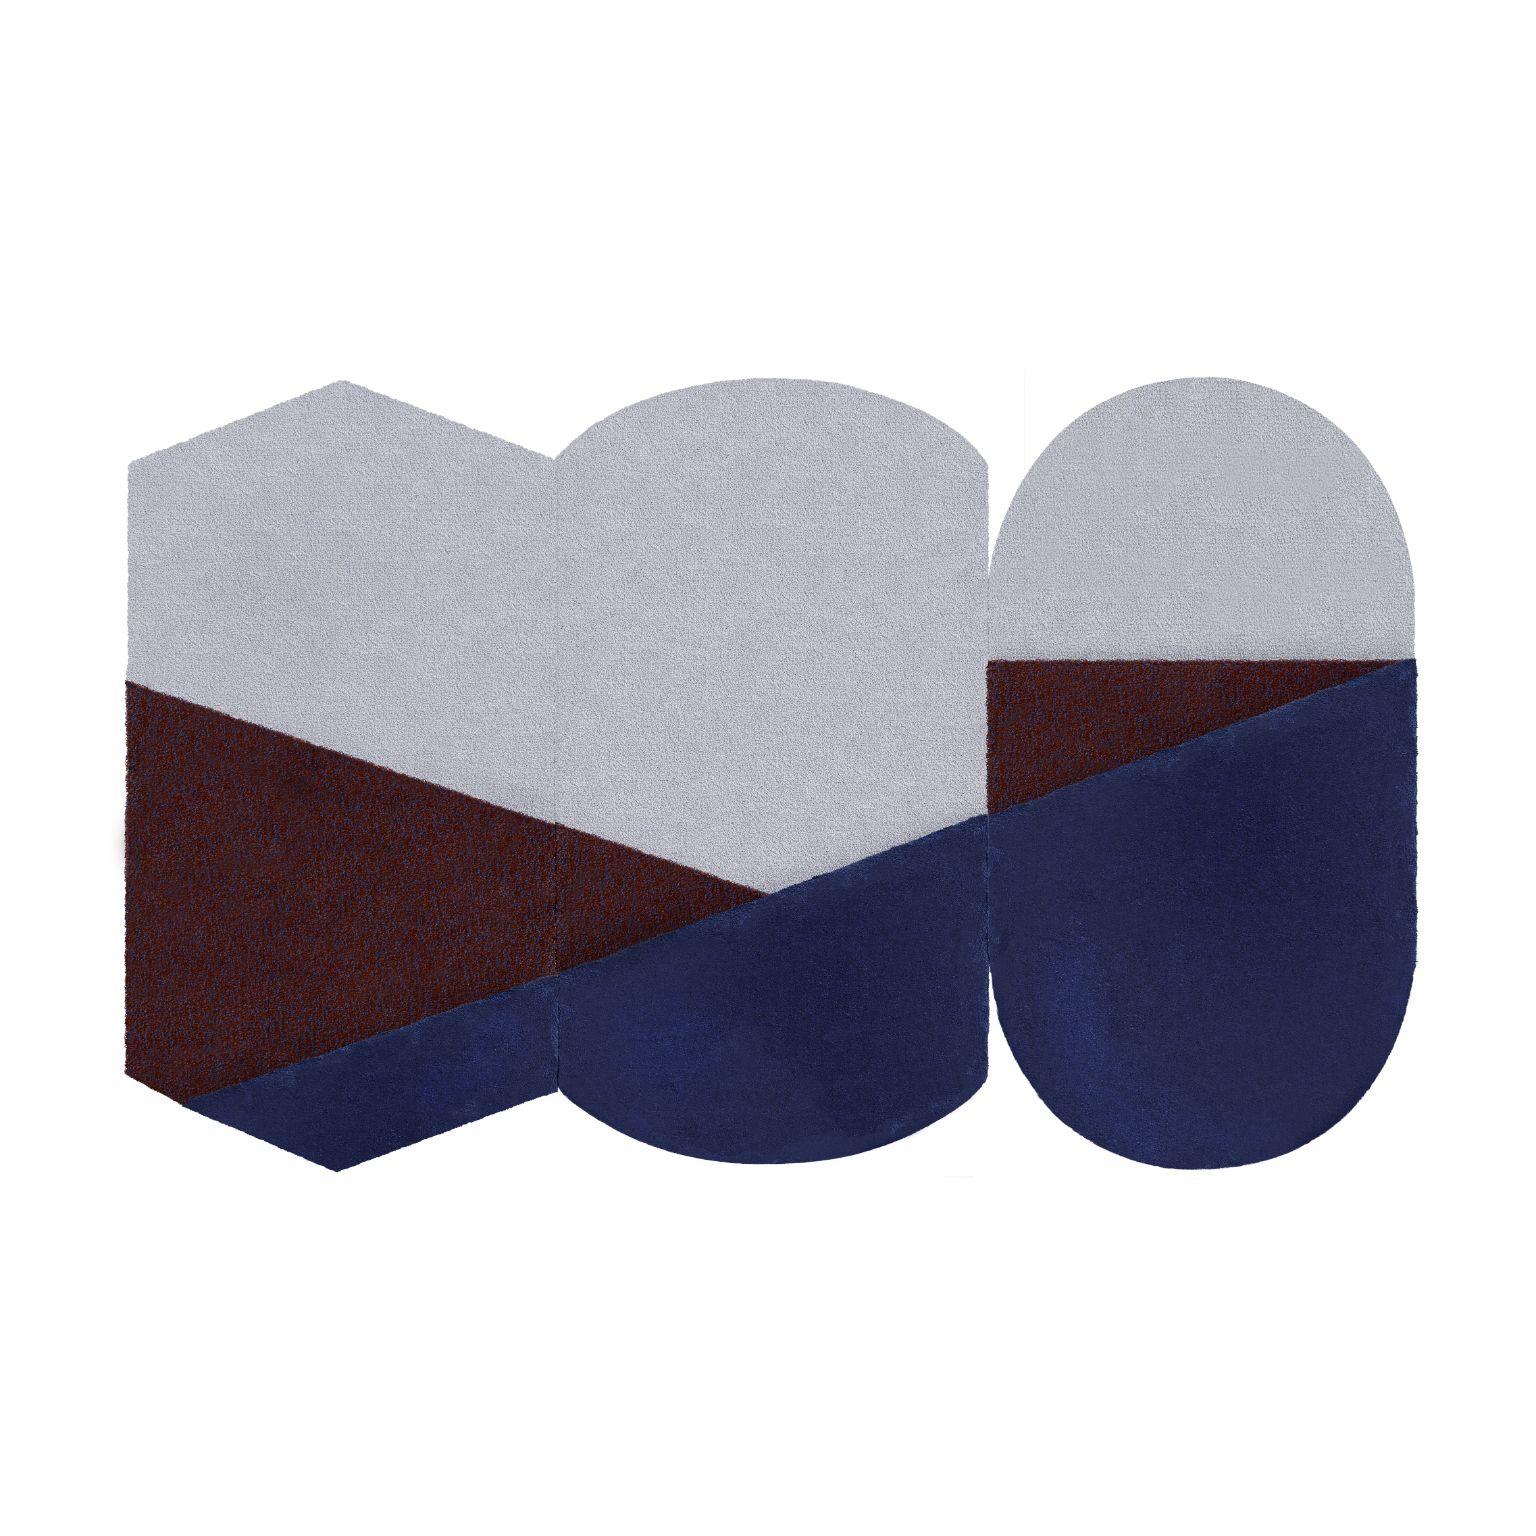 Medium Blue Oci Triptych rug by Seraina Lareida
Dimensions: 330 x 200 cm
Materials: 100% New Zealand top-quality wool.
Available in sizes Small or Large. Also available in colors: Brick/Pink, Yellow/Gray, Green/Brick, Blue/Brick. Customizable